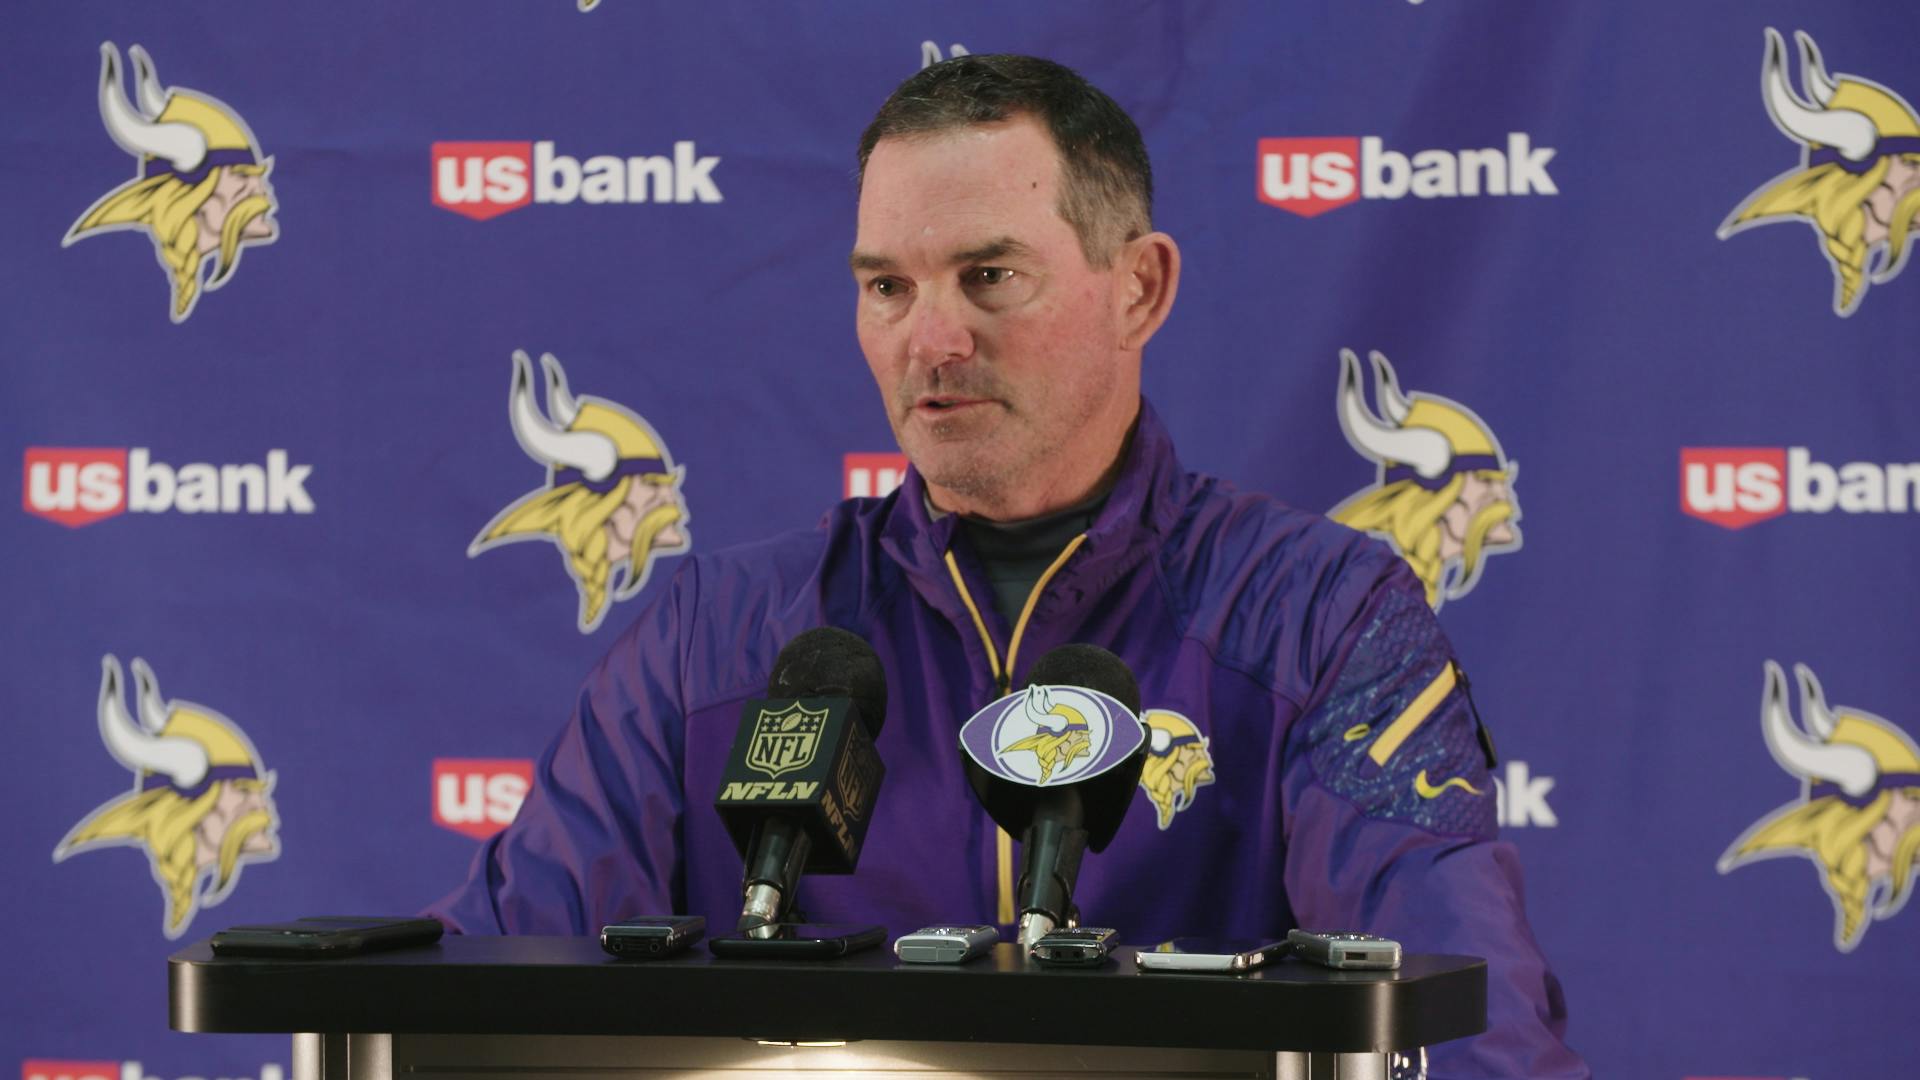 Vikings coach Mike Zimmer said he's been impressed by the rookies' willingness to apply lessons from practice.